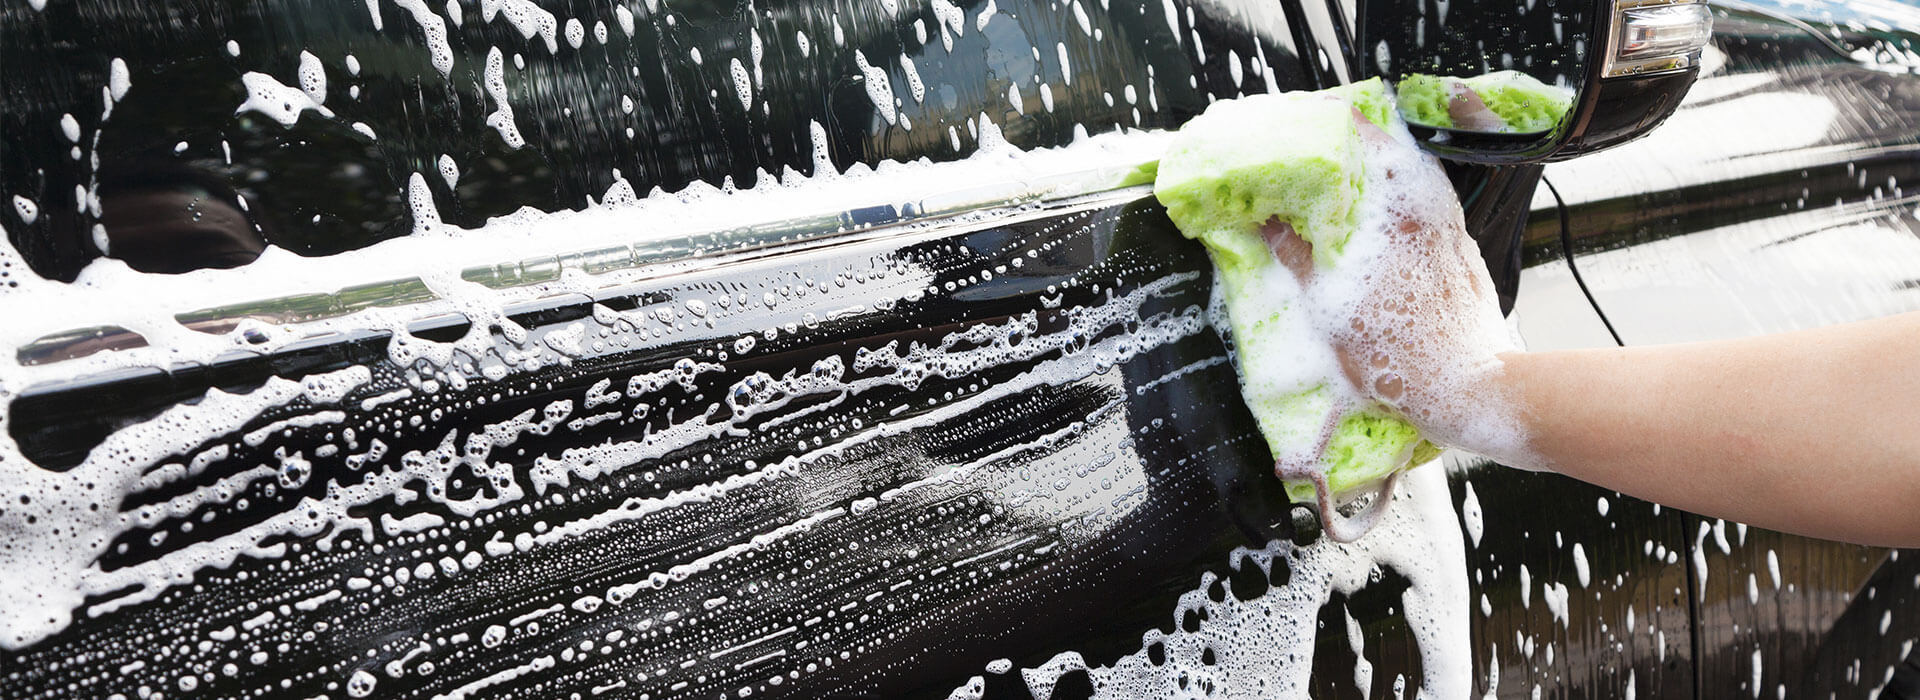  Mobile Car Wash, Pressure Washing Services and Power Washing Services